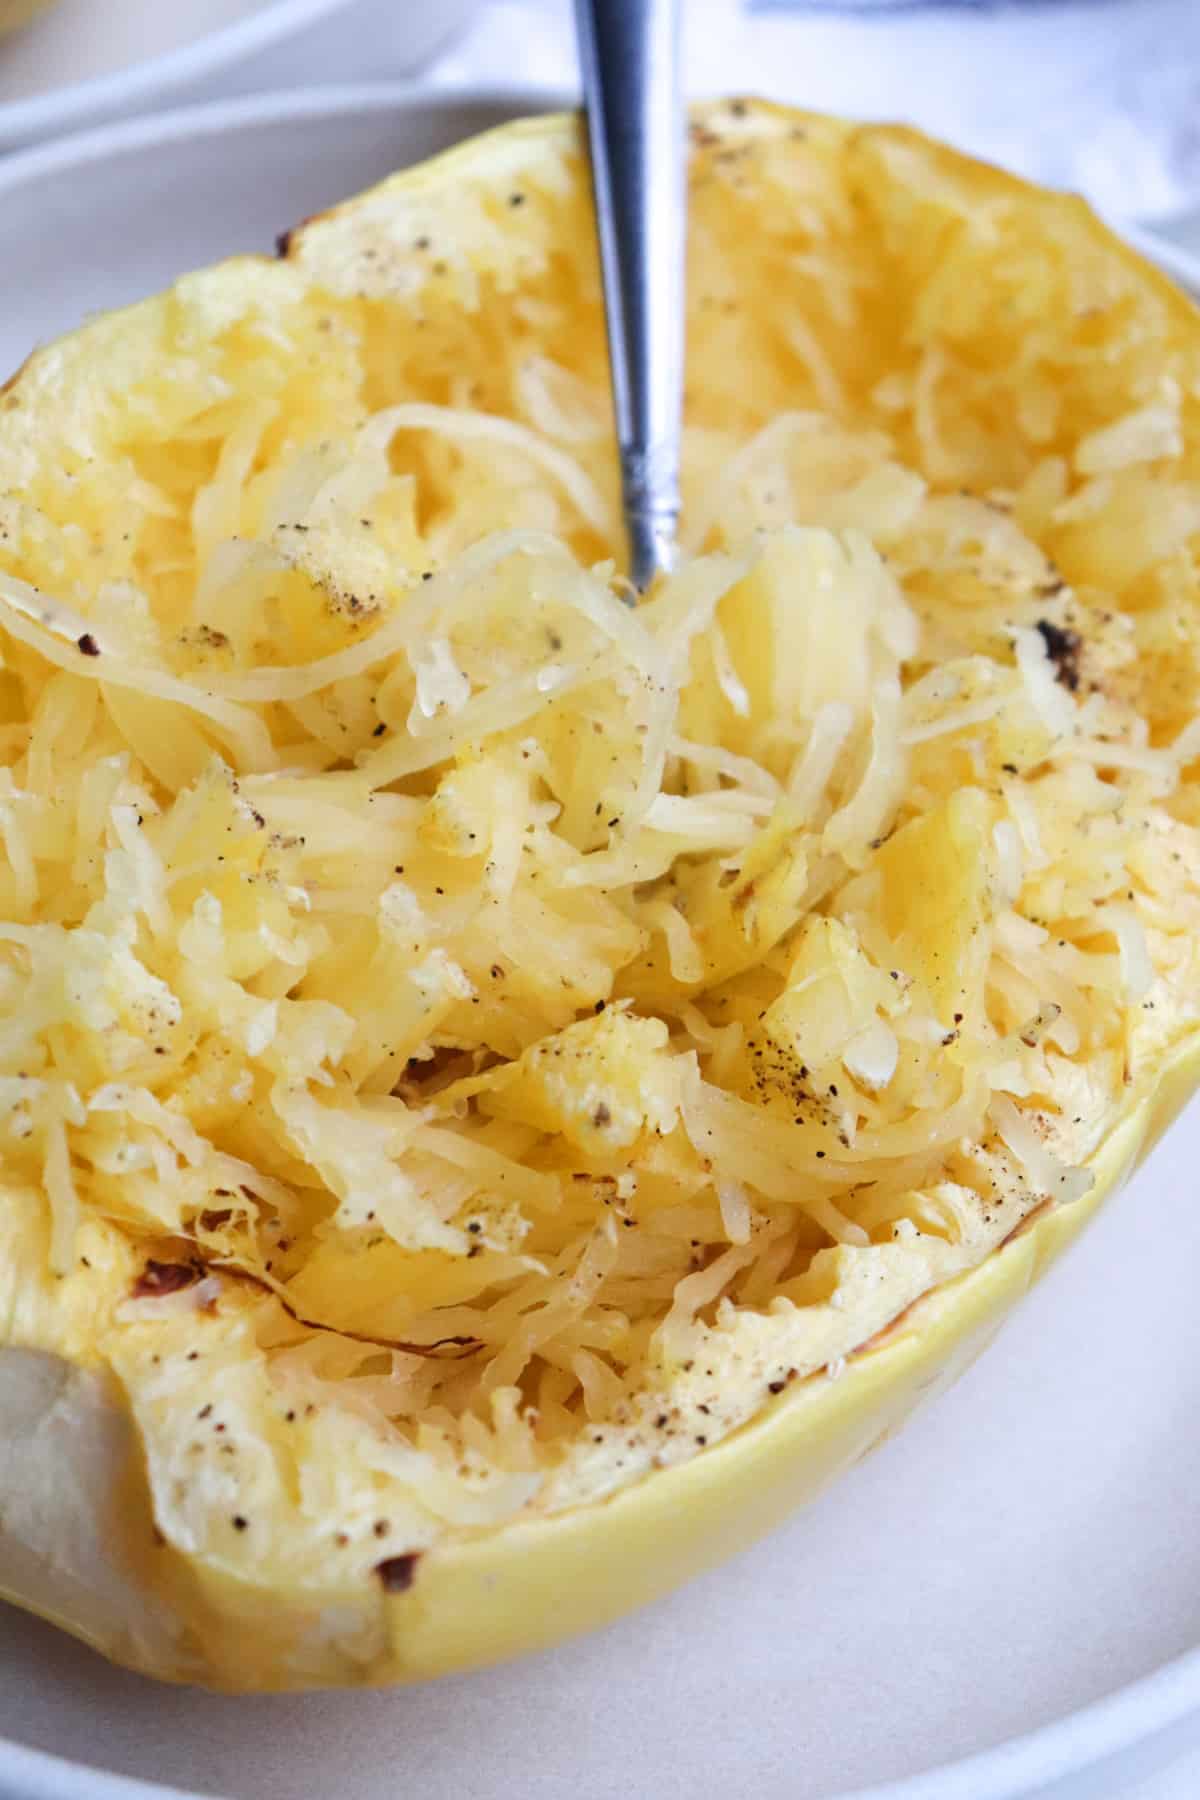 spaghetti squash that has been air fried and shredded.